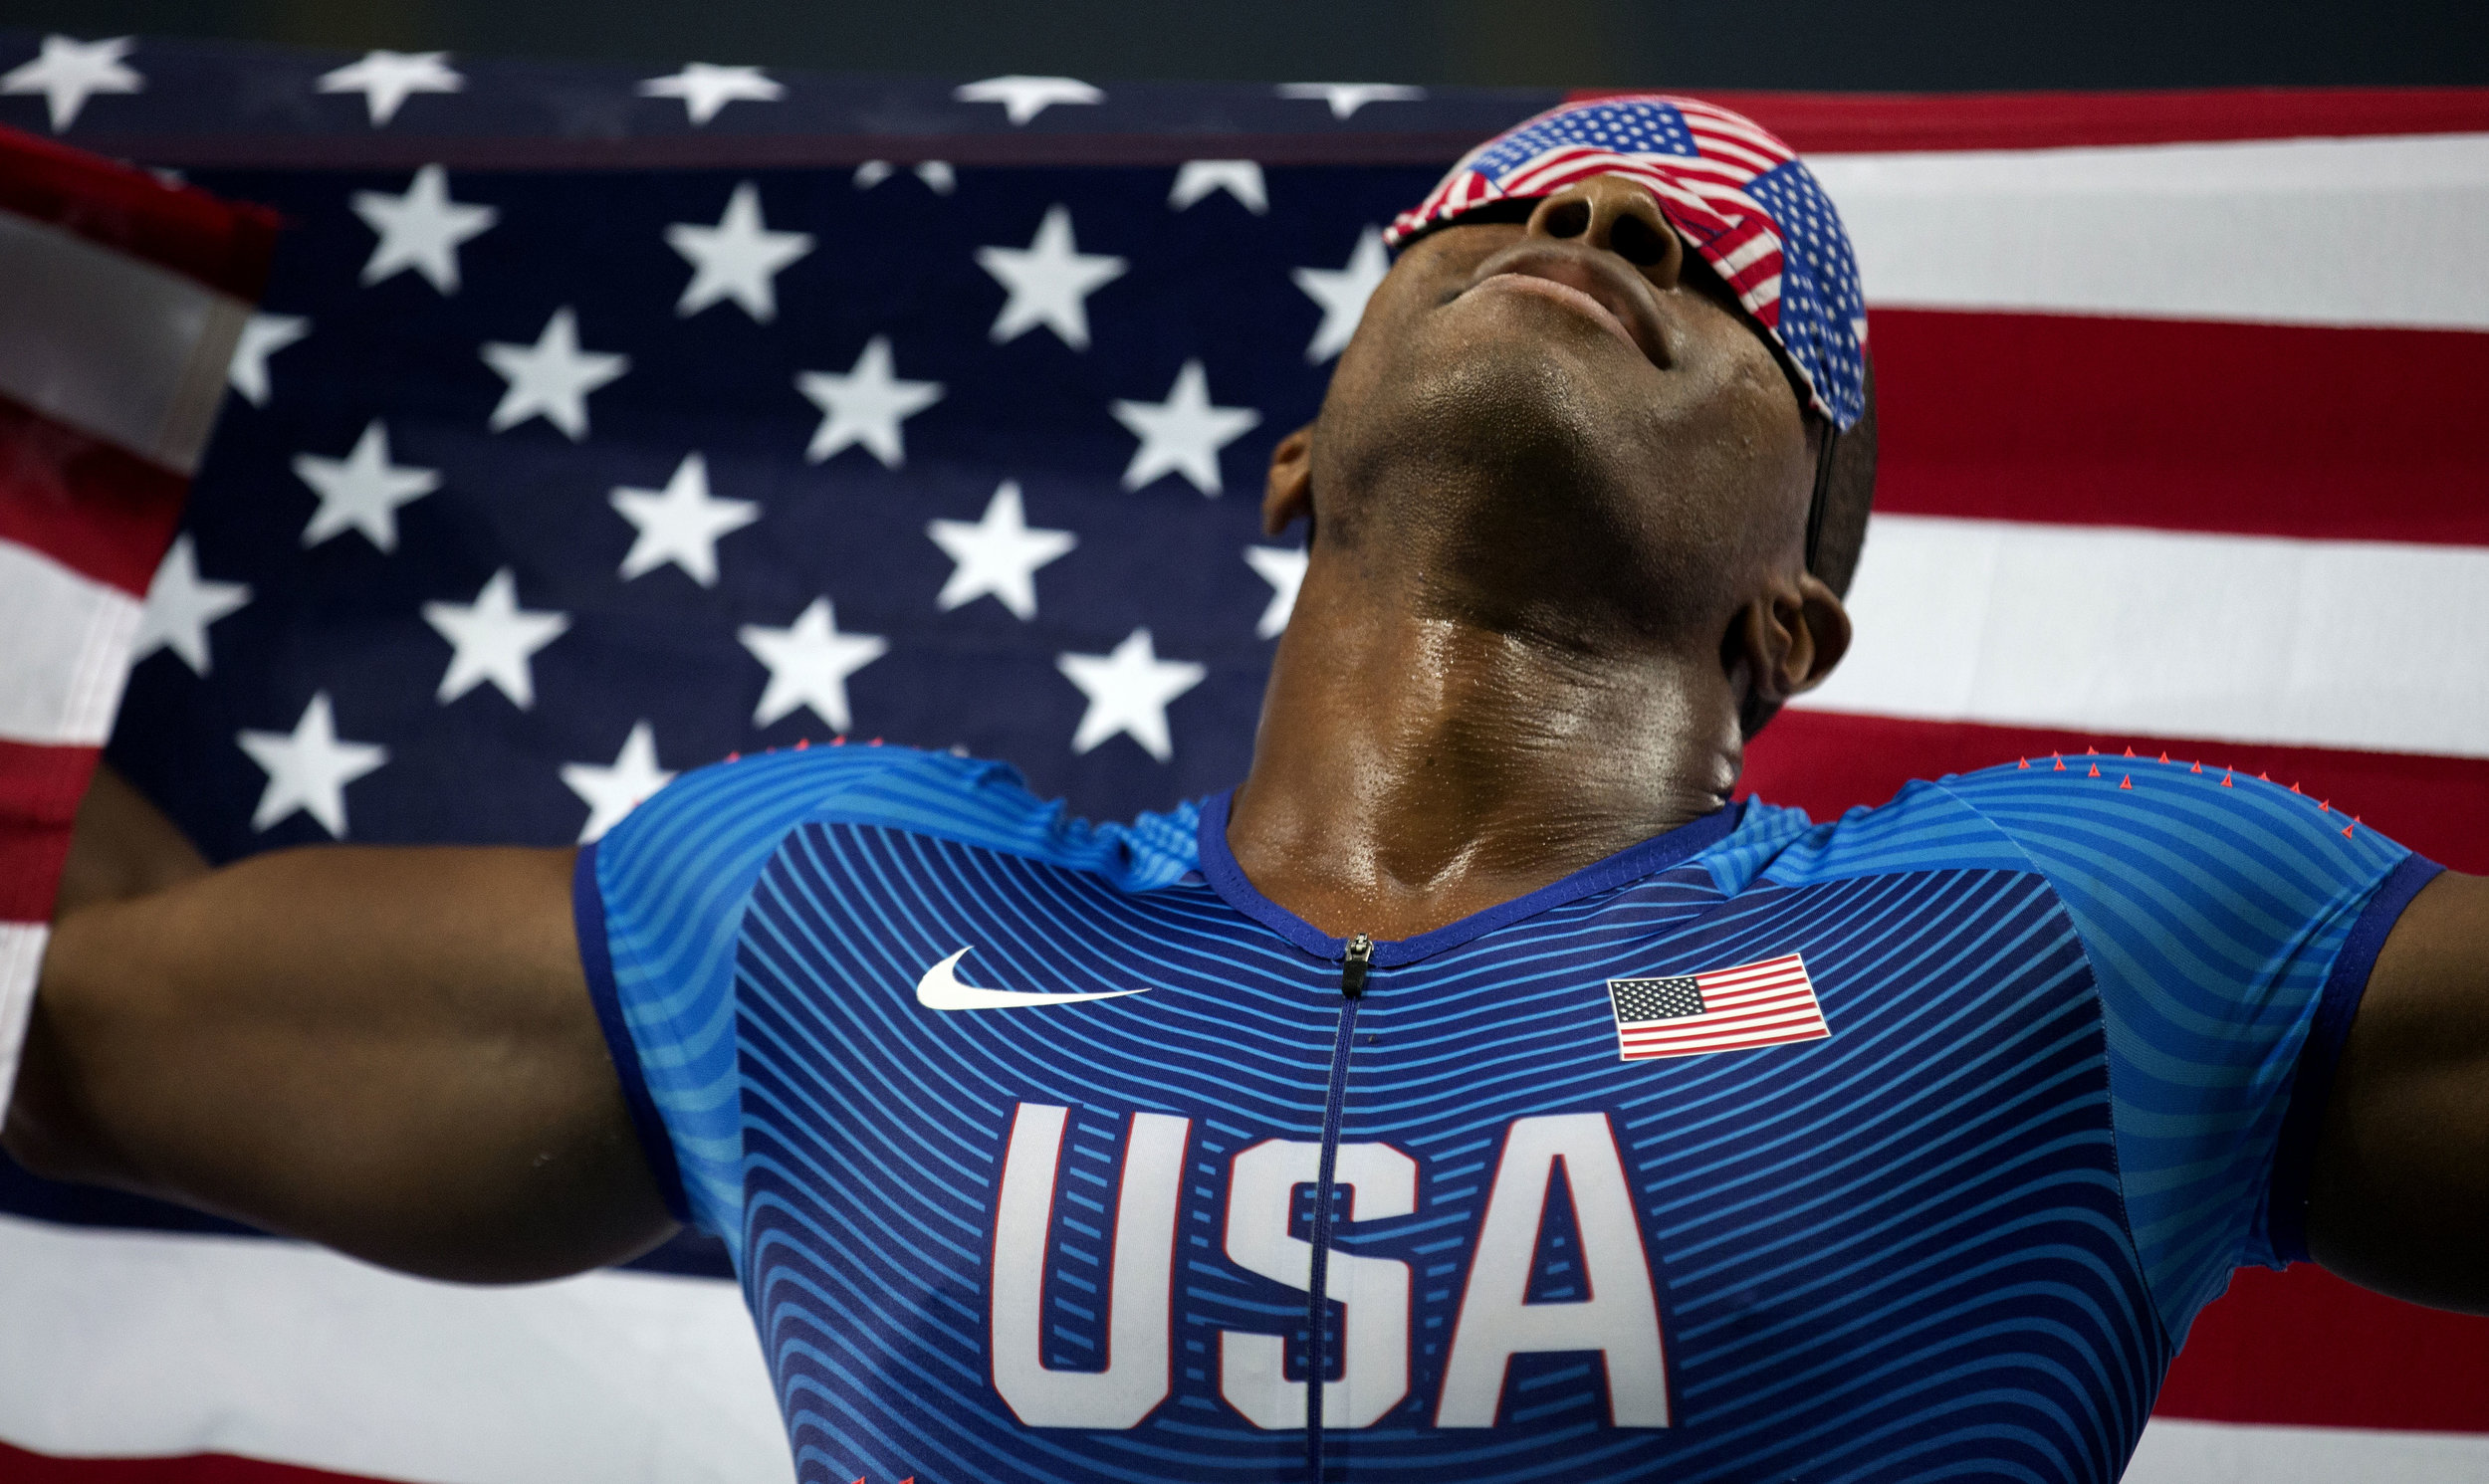  David Brown holds an American flag aloft as he and his sighted guide, Jerome Avery, celebrate Brown’s Paralymic record time of 10.99 seconds in the 100 meter dash at the 2016 Paralympic Games at Olympic Stadium in Rio de Janeiro, on Sunday, Sept. 11